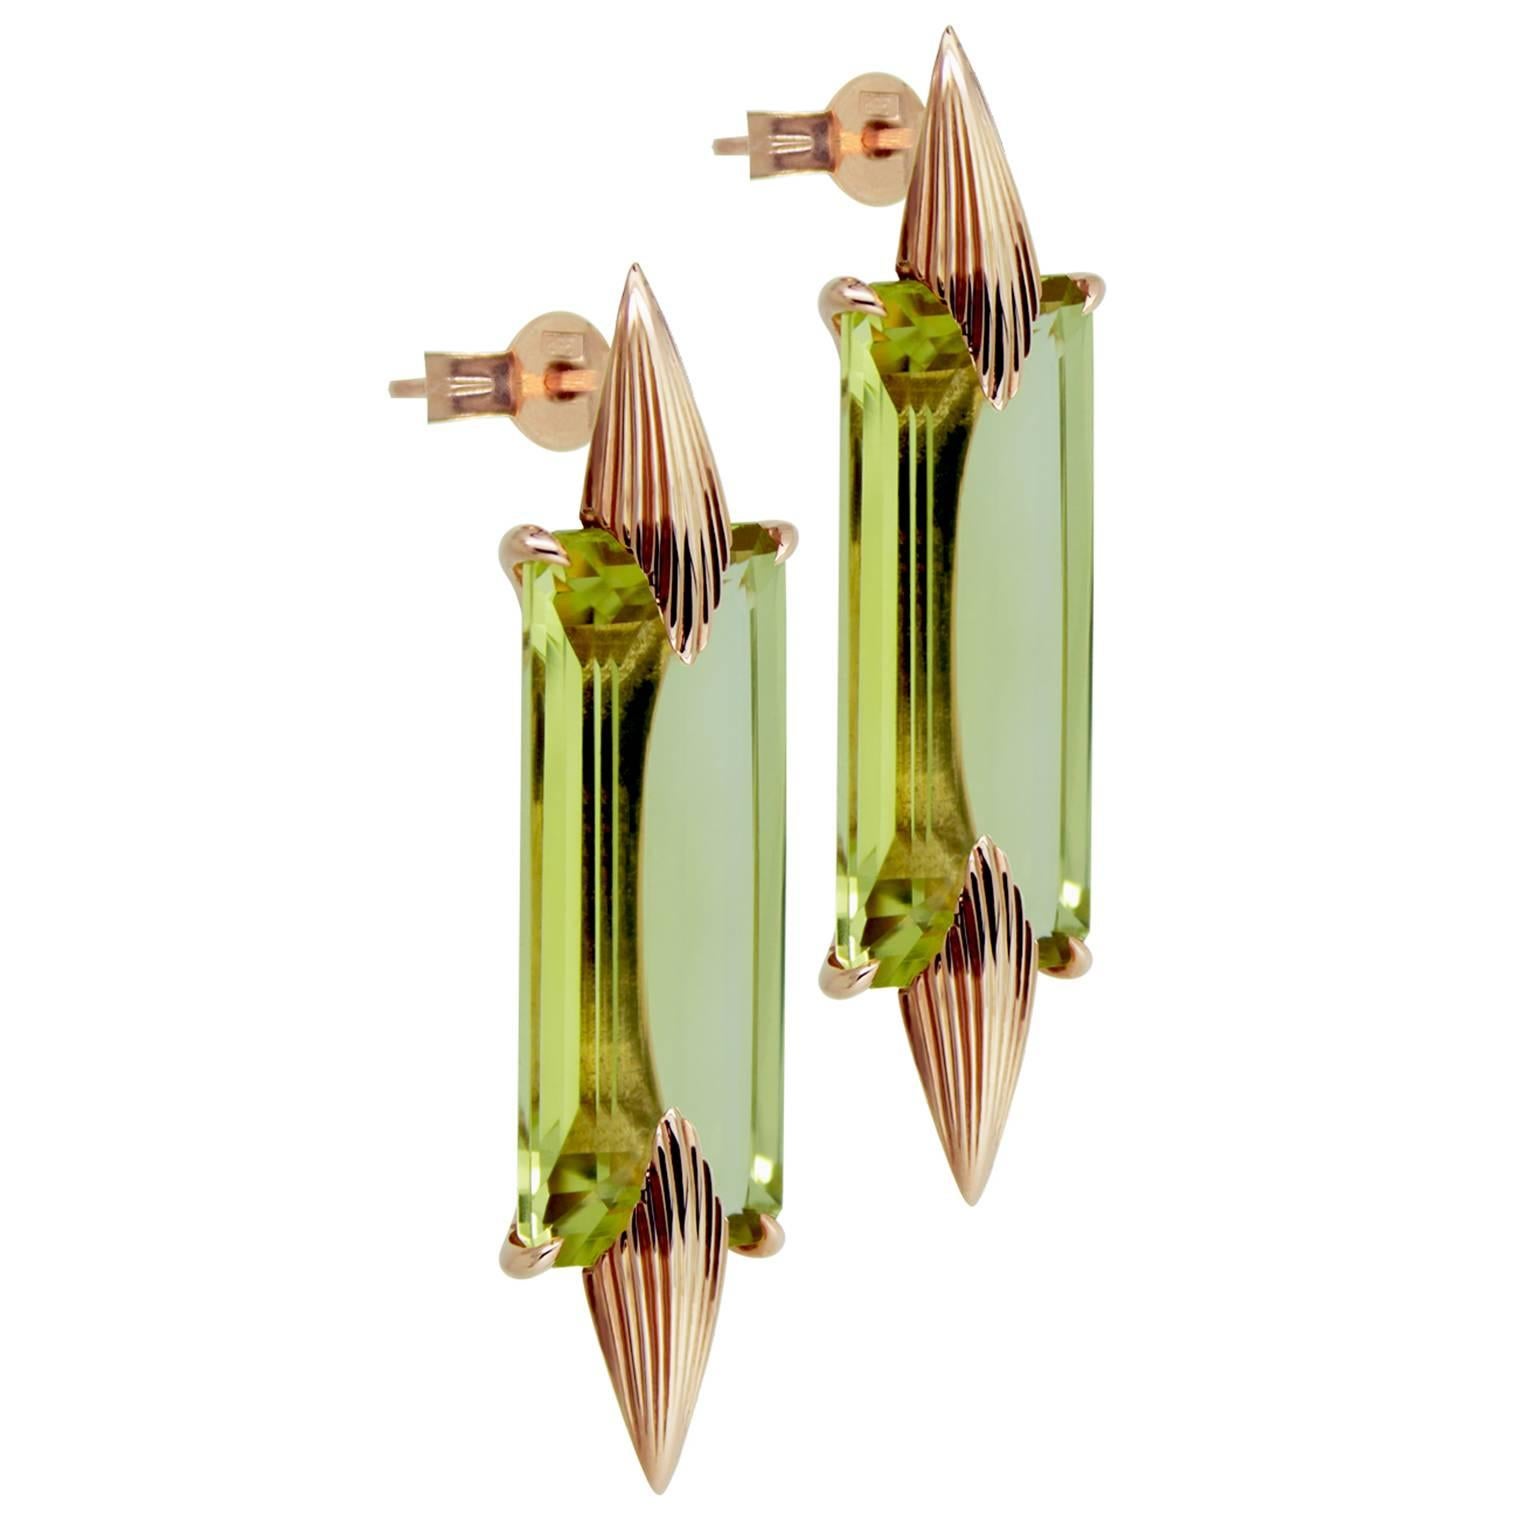 A striking pair of Brazilian Lemon Quartz earrings. Set in 9k Rose Gold four claw mount with elegant detailed tapered spikes. The stones measure 25mm height x 10mm width x 7mm deep total 27ct. The baguettes are held from the back with a simple